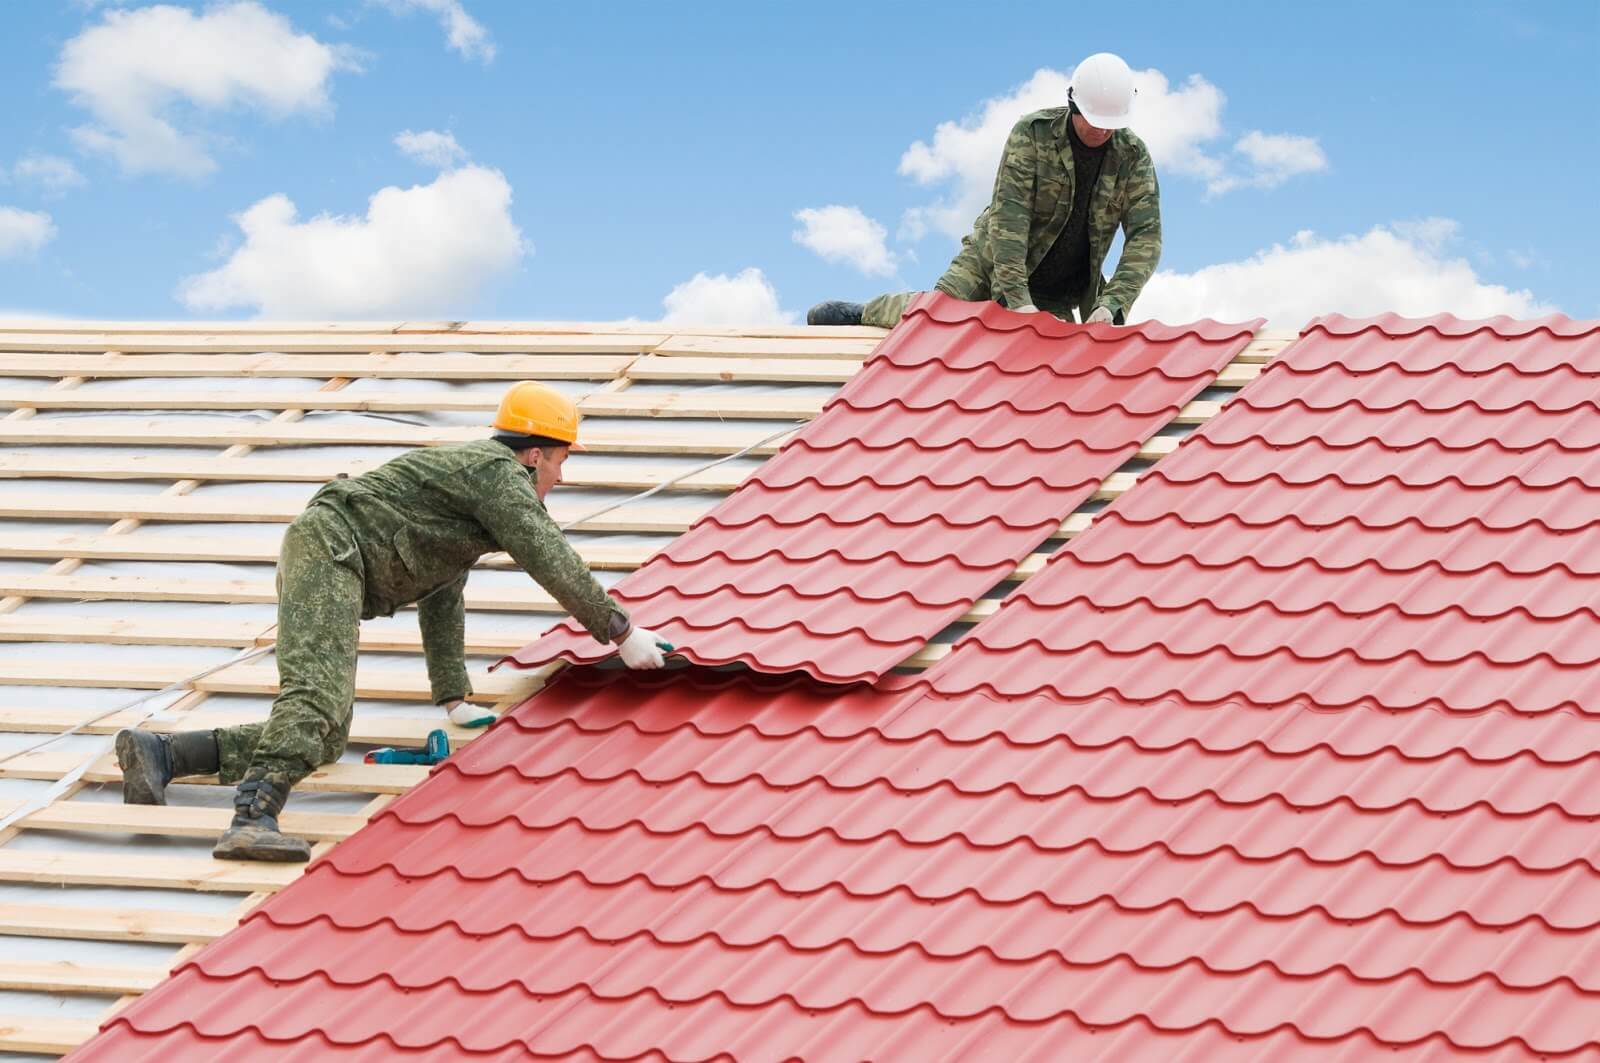 Greater Chicago Roofing - Naperville Metal Roofing